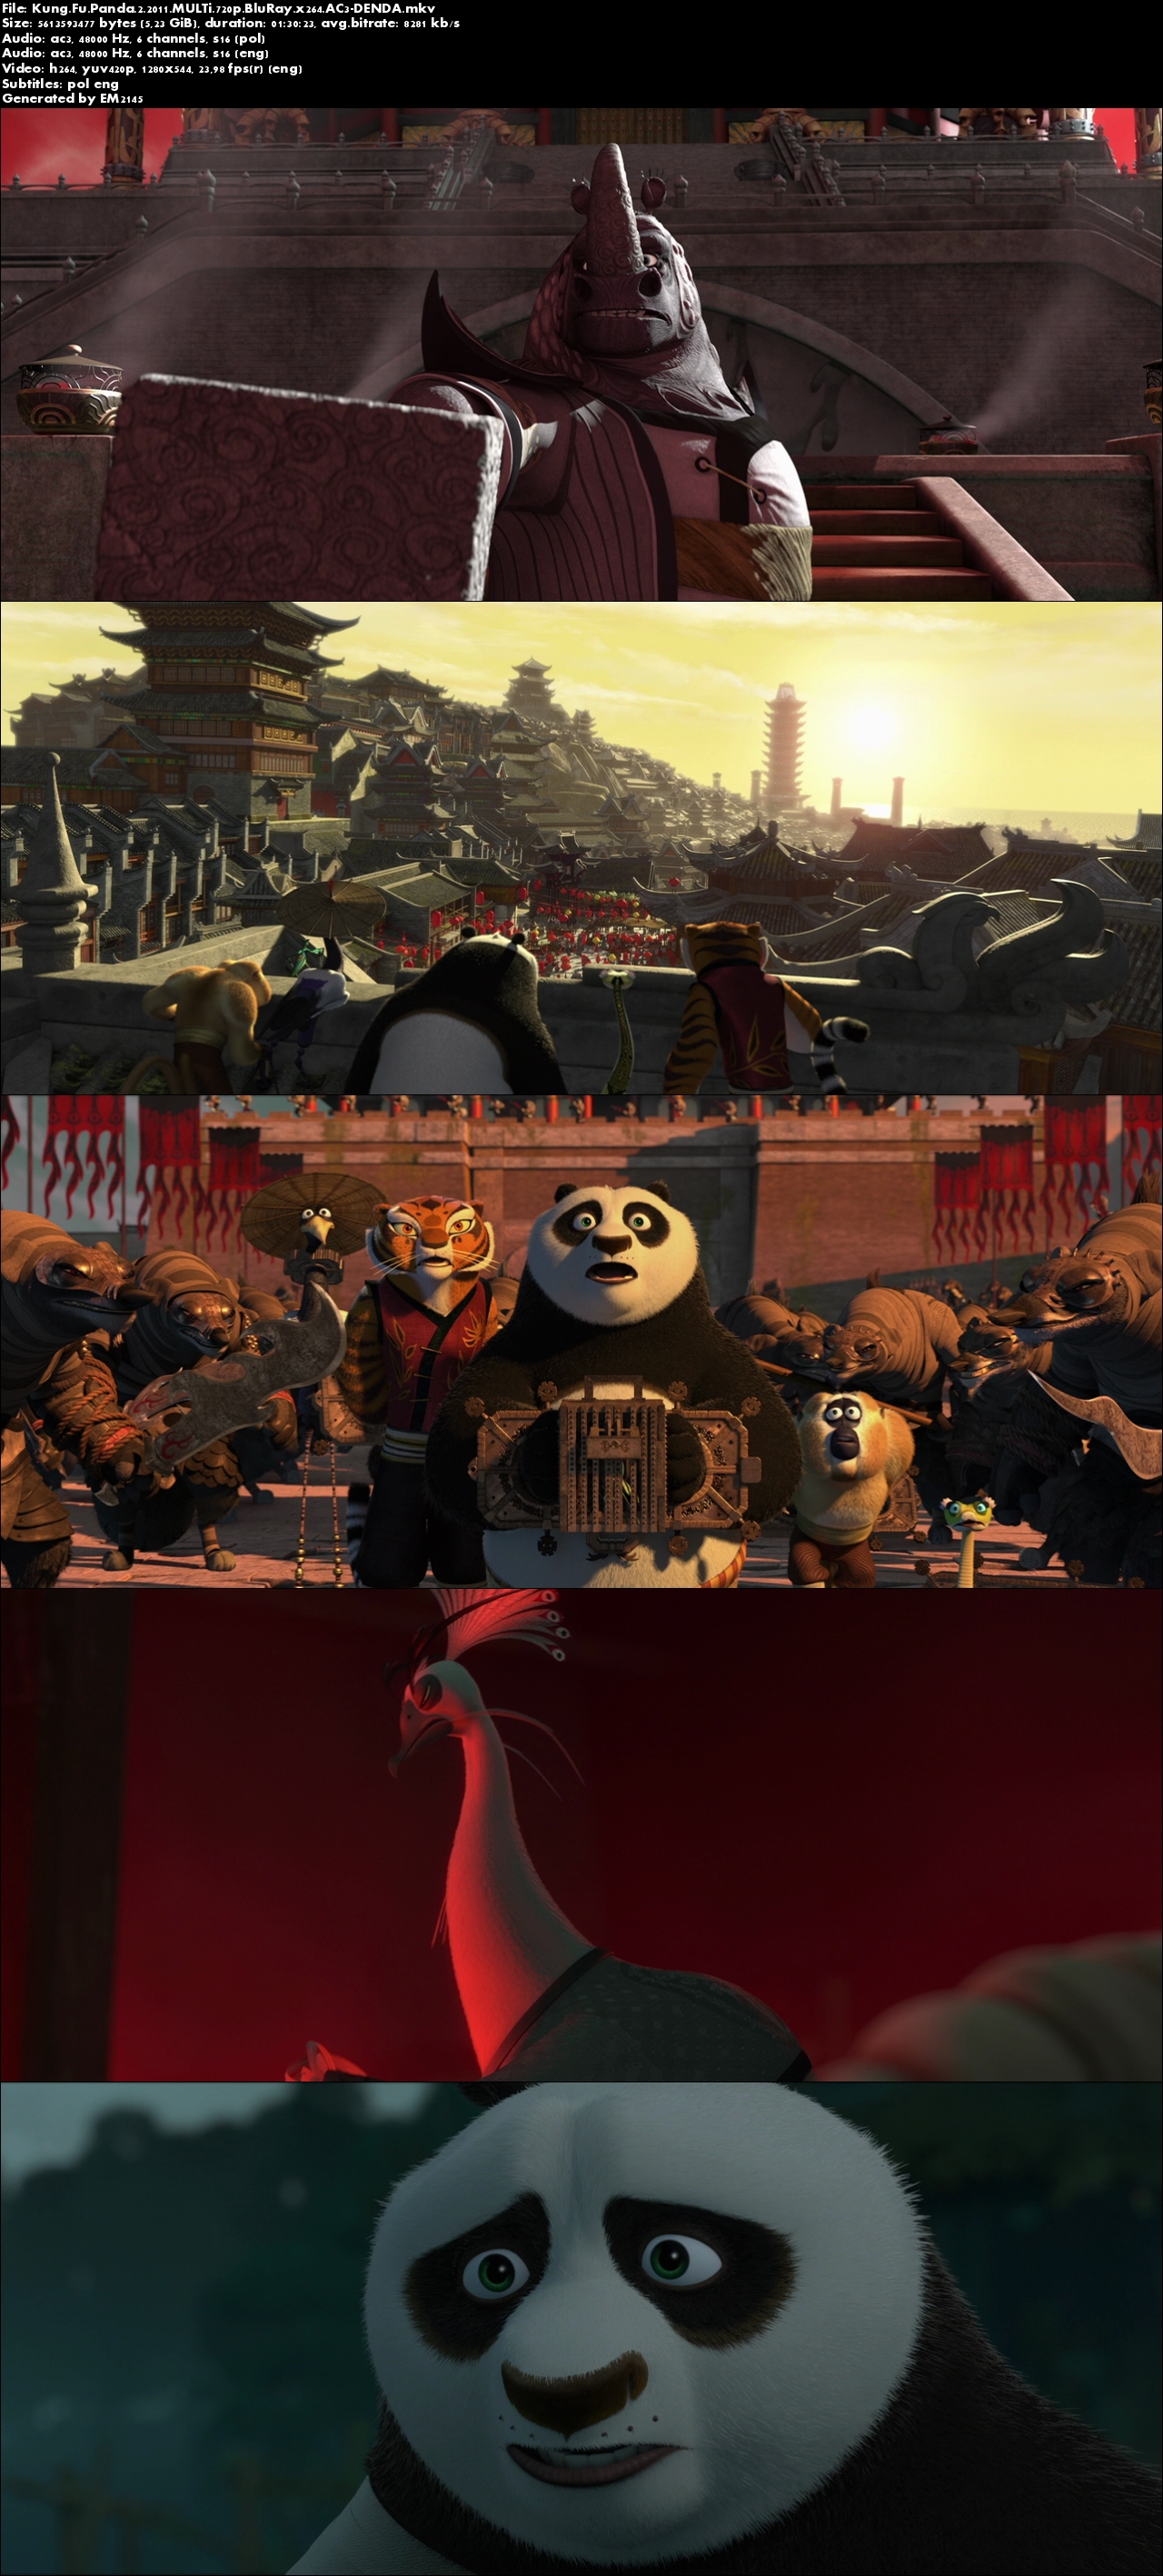 kung fu panda torrents free download search results ETTV